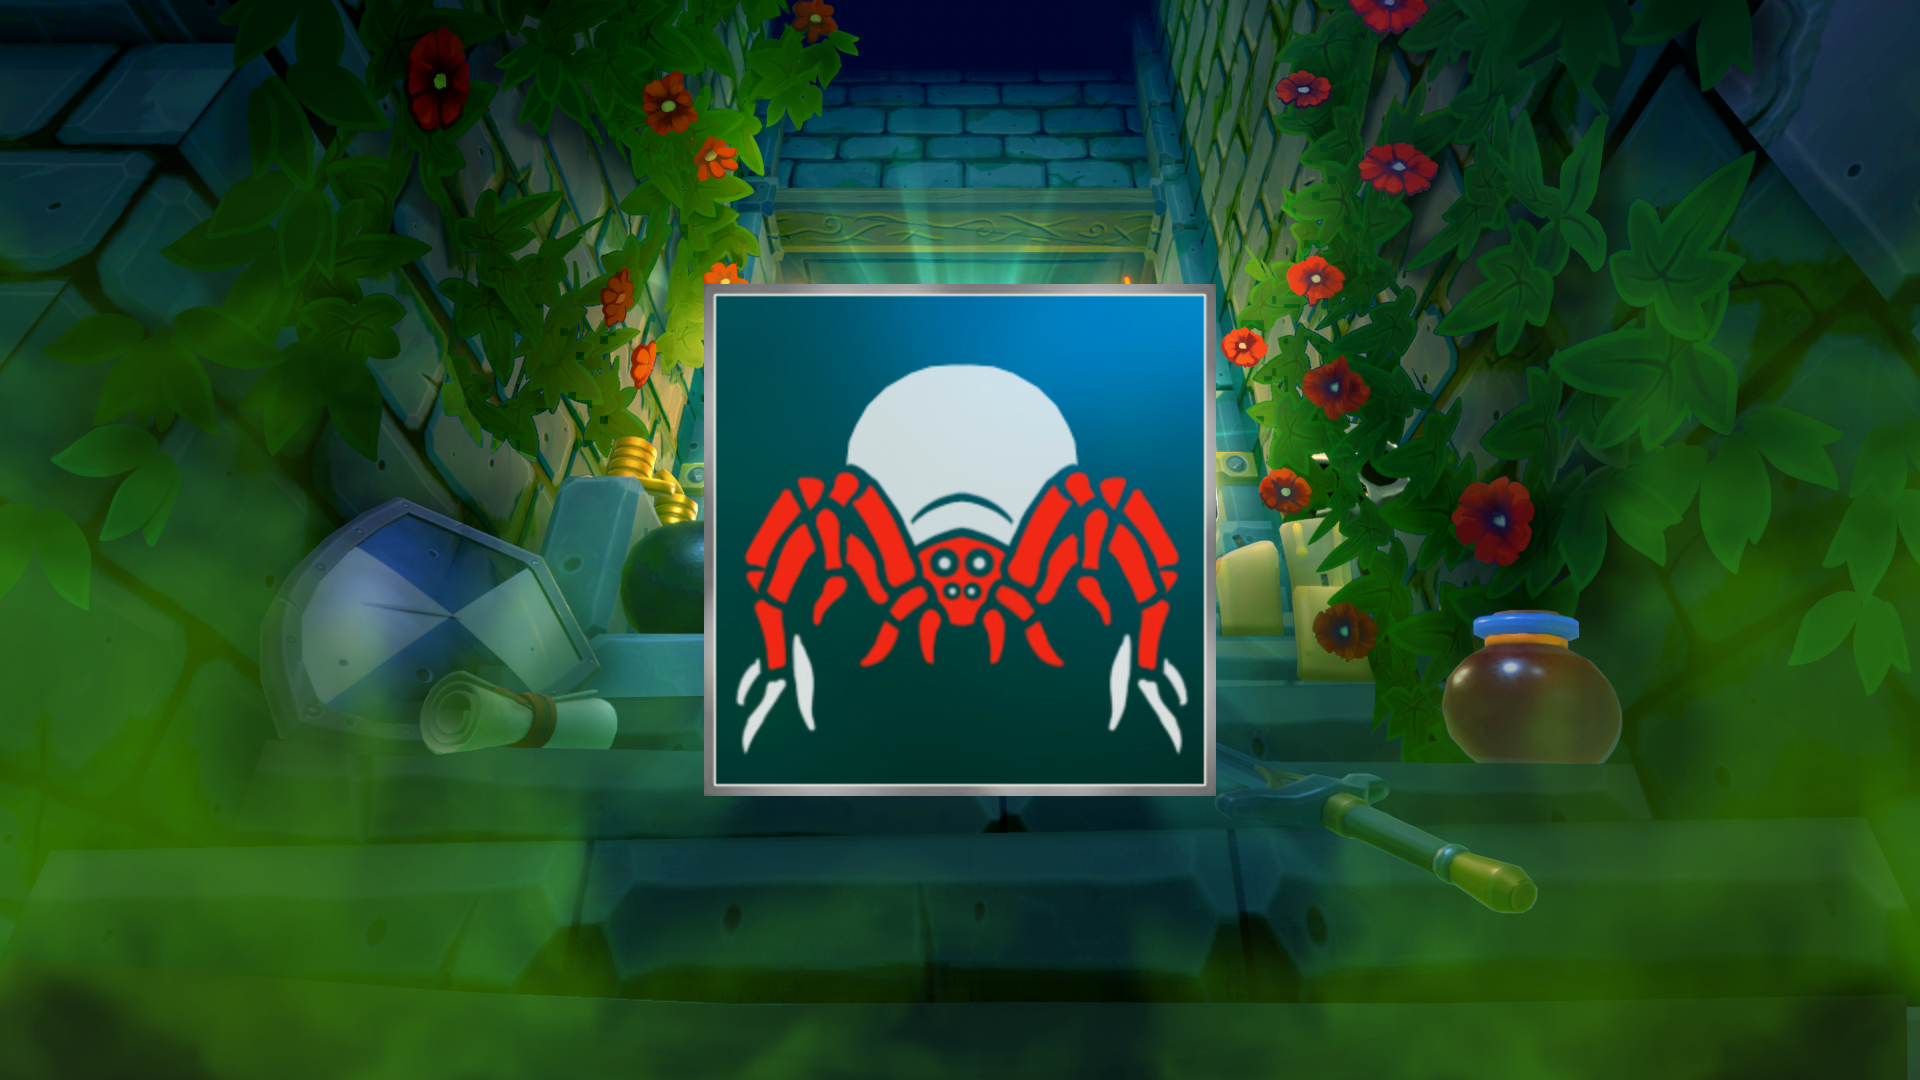 Icon for Spider